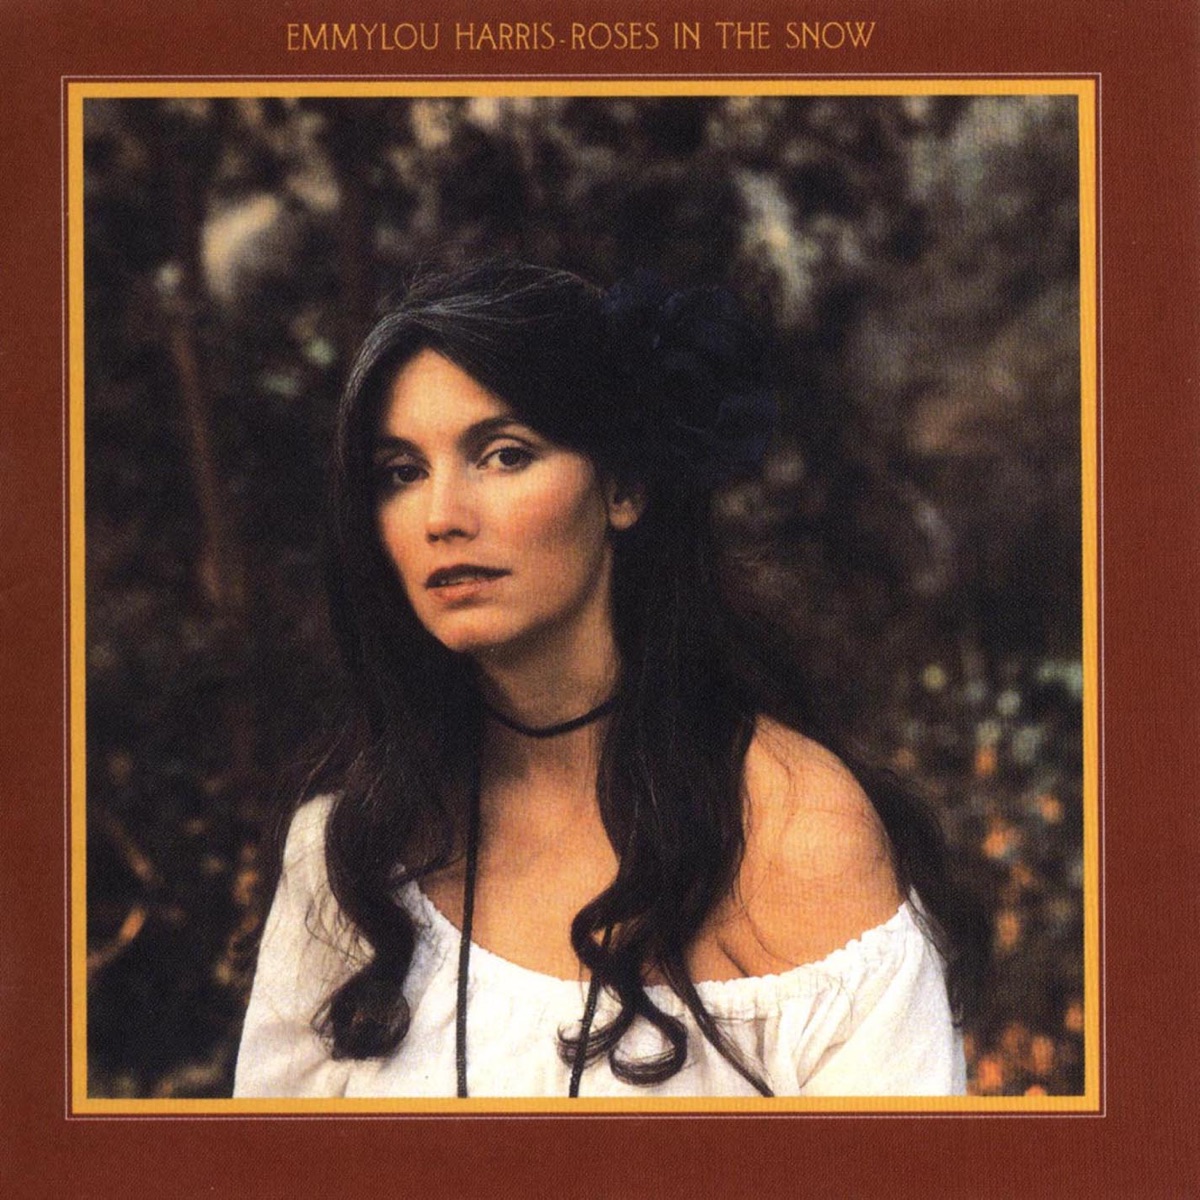 Luxury Liner (Remastered) - Album by Emmylou Harris - Apple Music